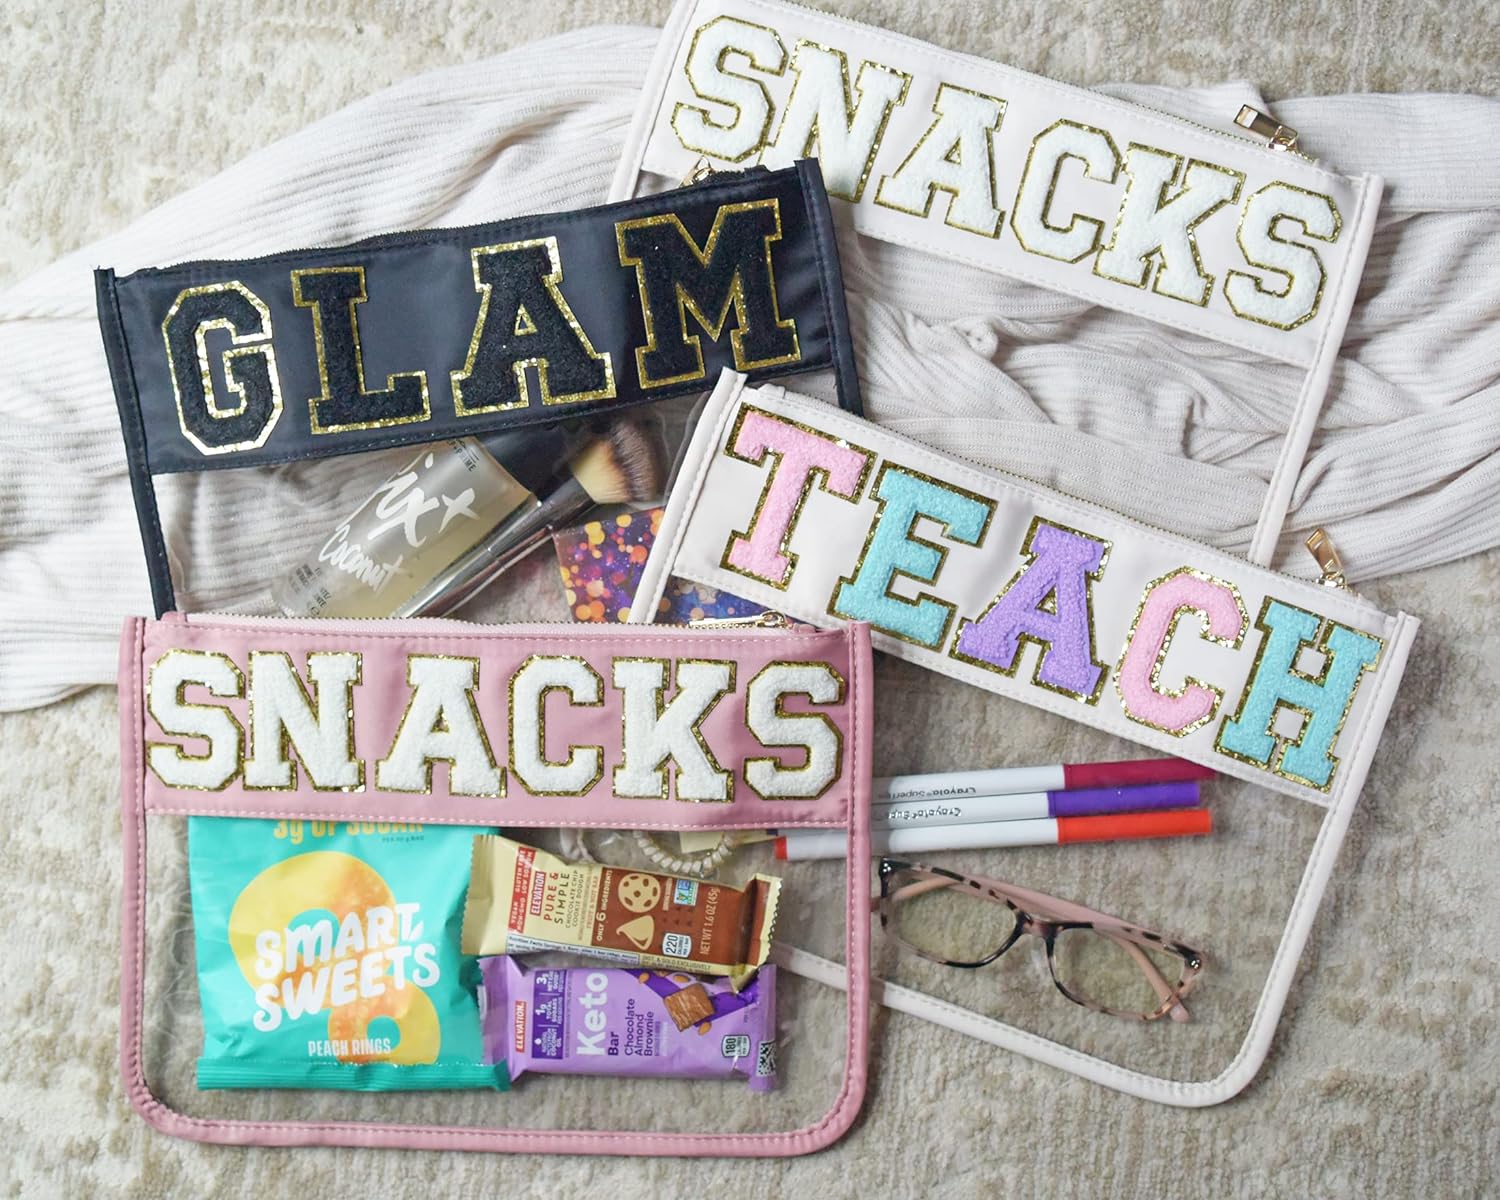 Clear Pouch with Patches, Varsity Letter Patches, Personalized Gift, Clear Bag, Makeup Bag, Snack Bag Pouch for Travel (Teach (ivory))